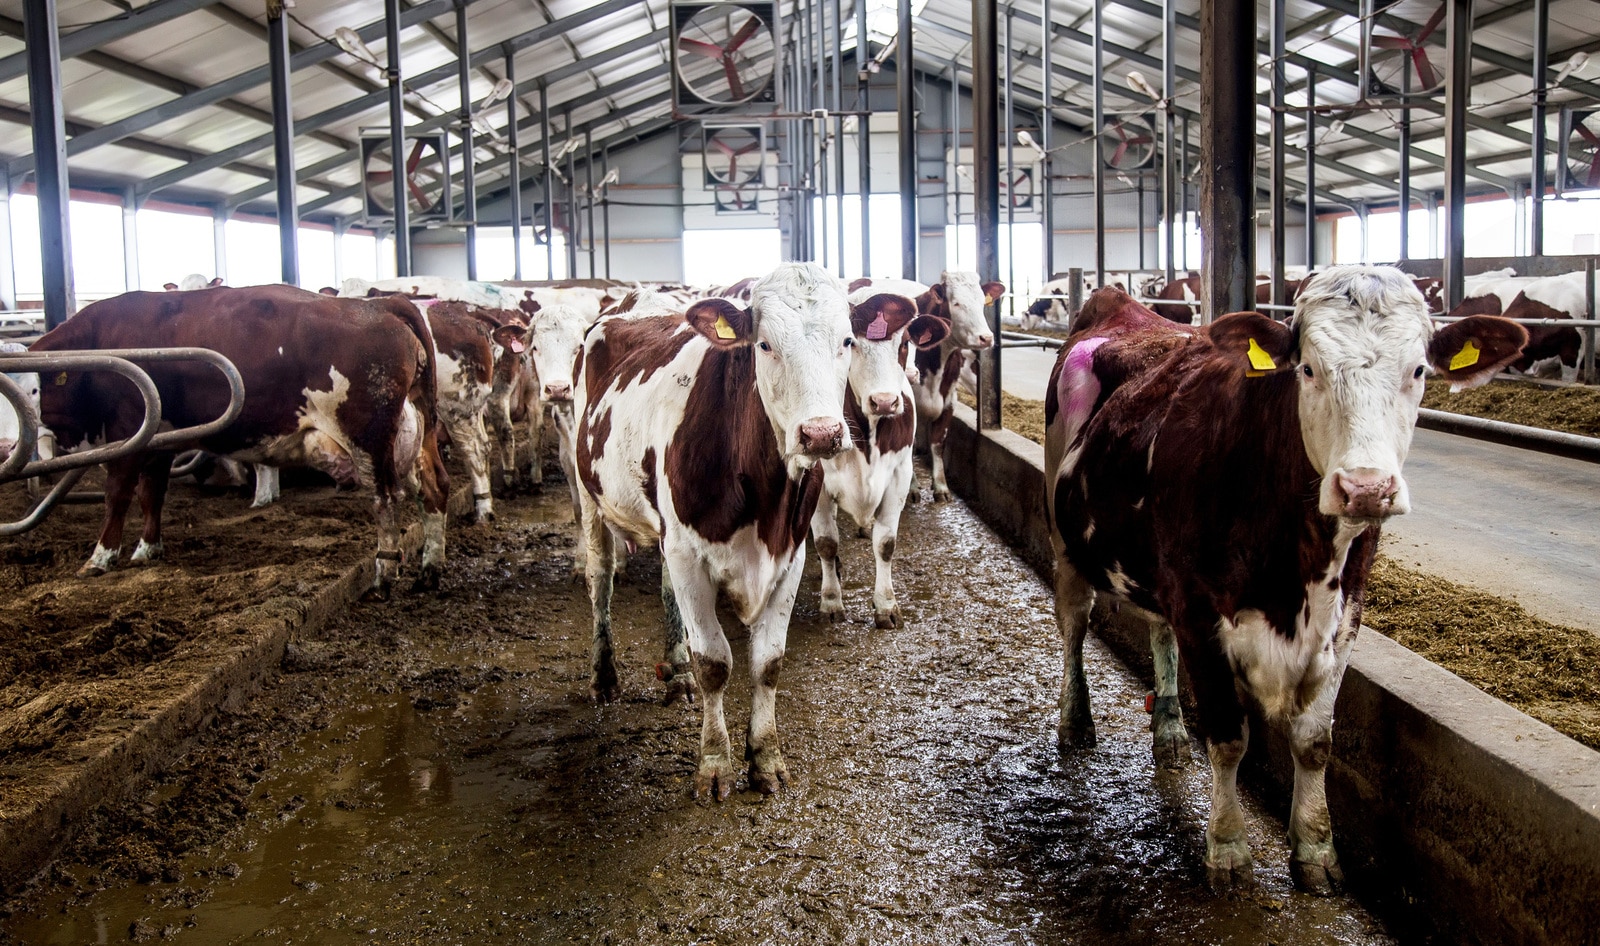 Report: Factory Farming Is the “Single Most Risky Behavior” for Future Pandemics&nbsp;